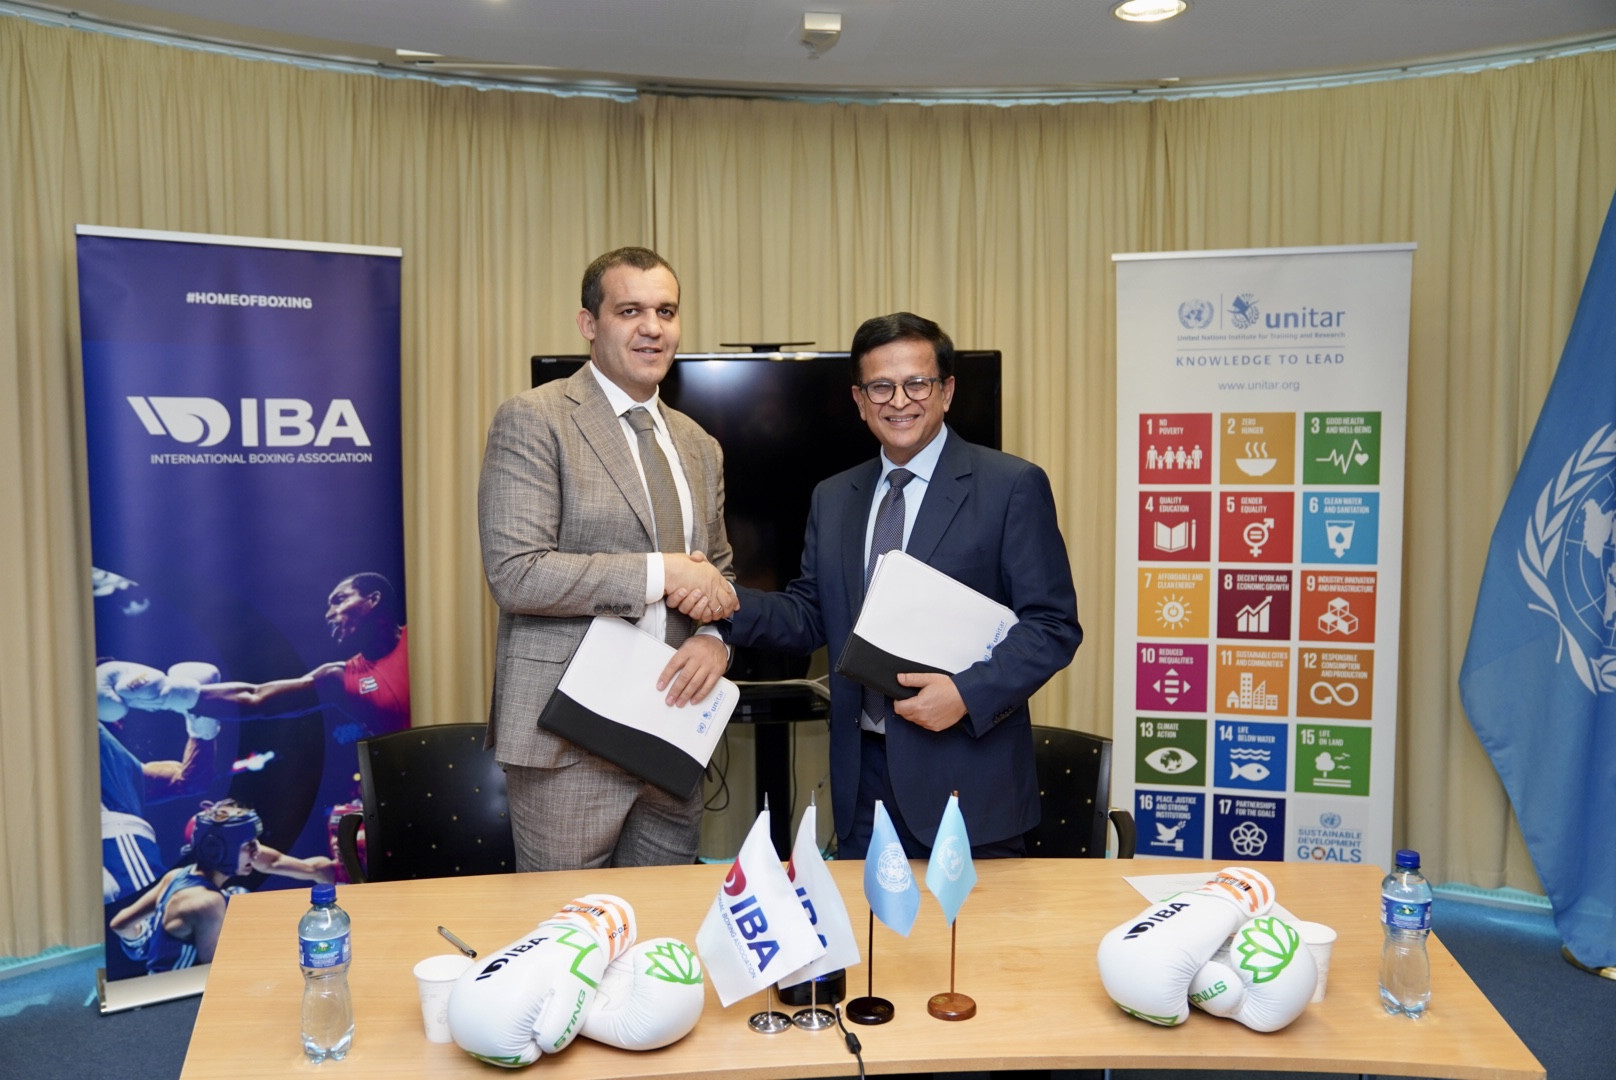 Umar Kremlev, left, feels the deal with UNITAR is crucial for the IBA to "promote values of continuous learning" ©IBA